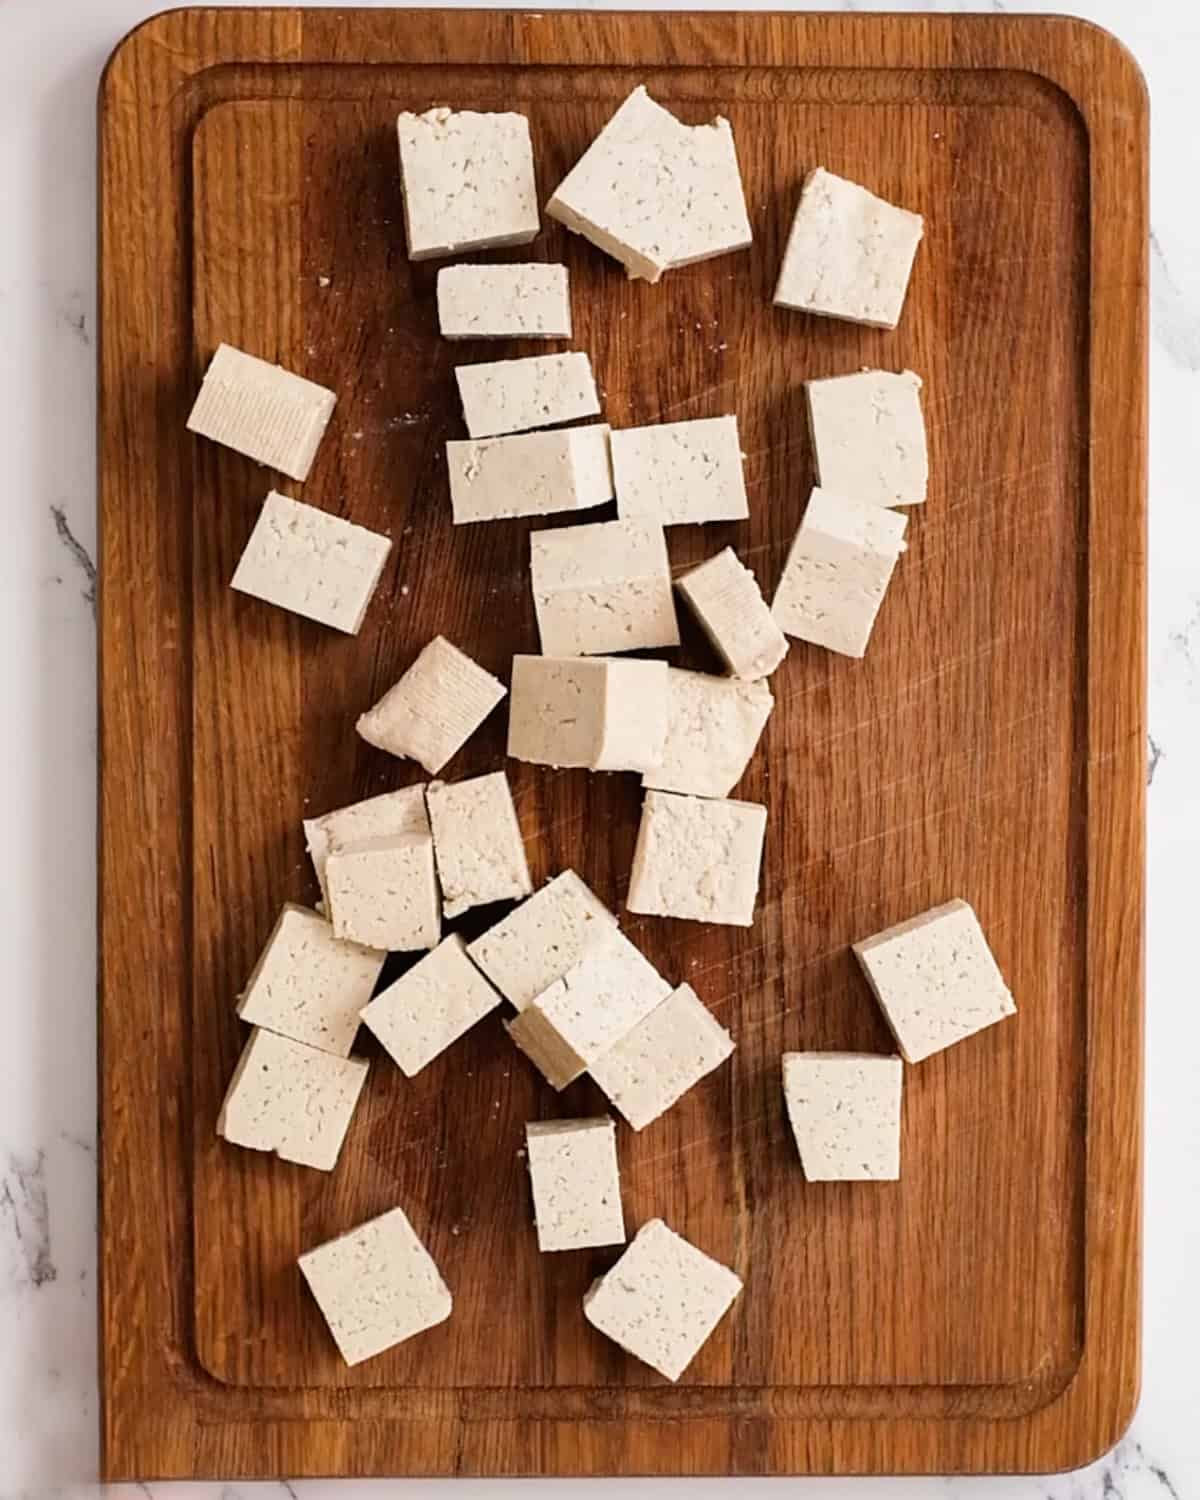 tofu cut into cubes on a wooden cutting board